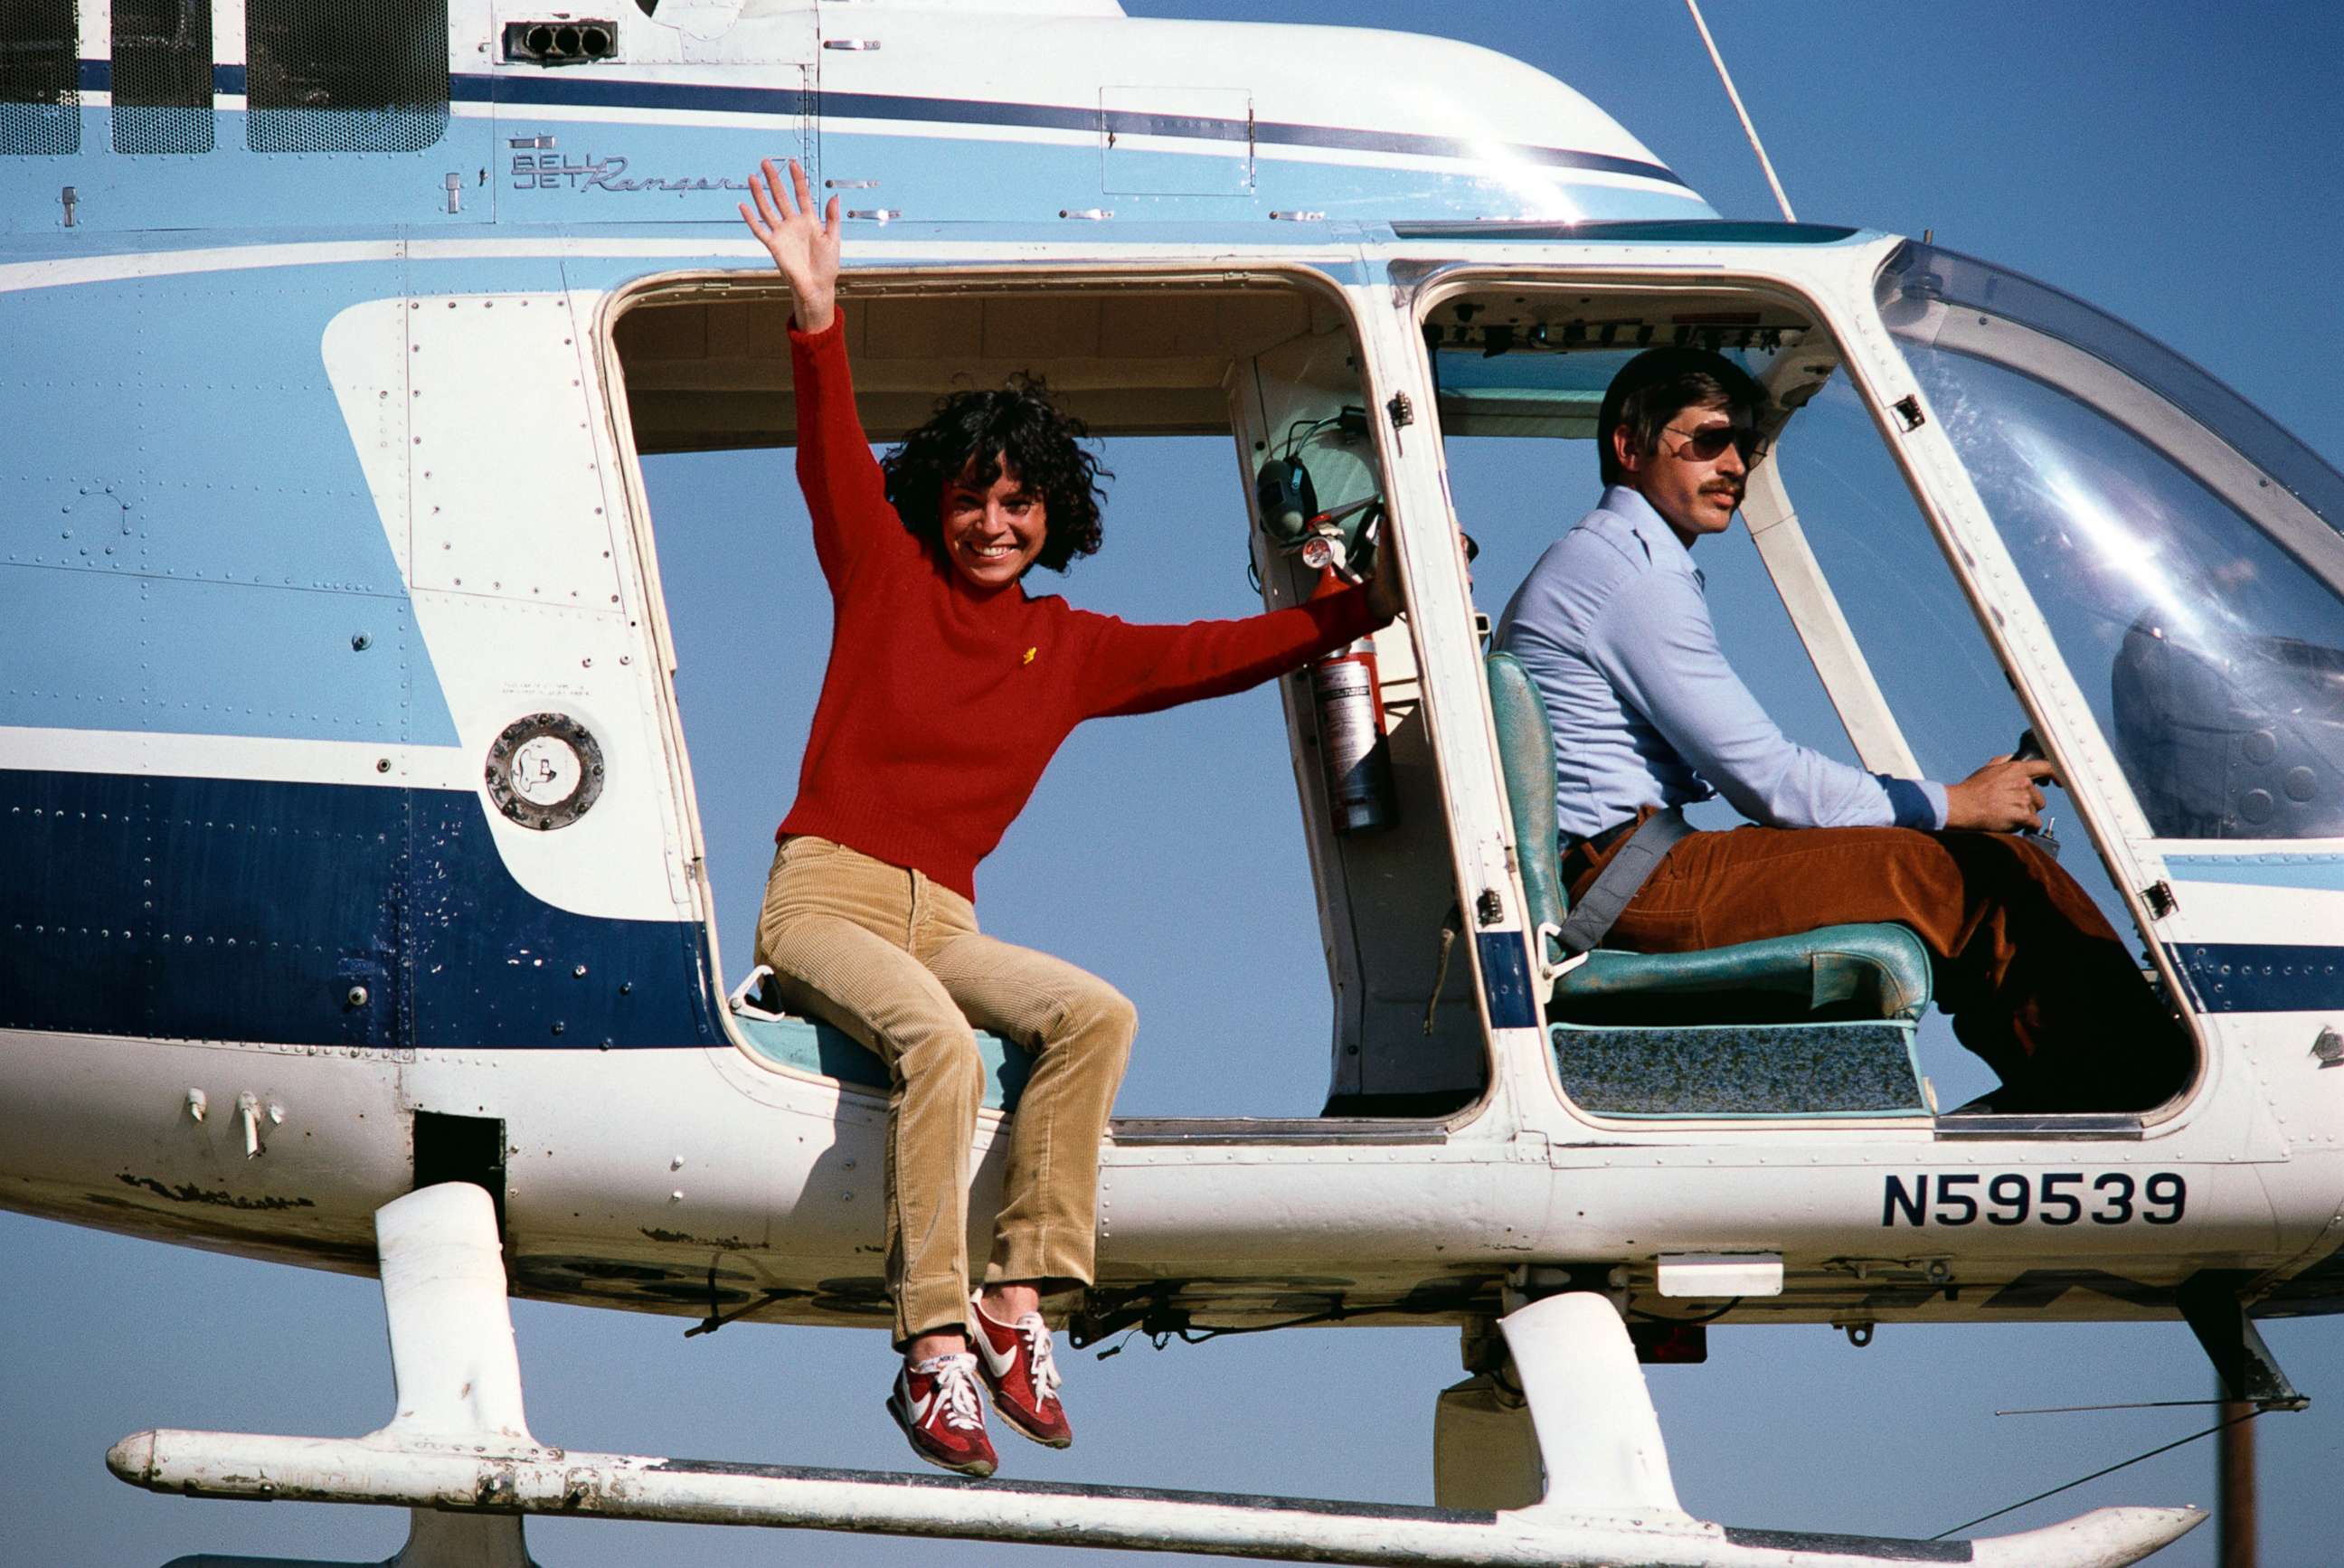 PHOTO: Stunt performer Kitty O'Neil waves from a helicopter before jumping while doubling for Lynda Carter in the show "Wonder Woman", circa 1979.